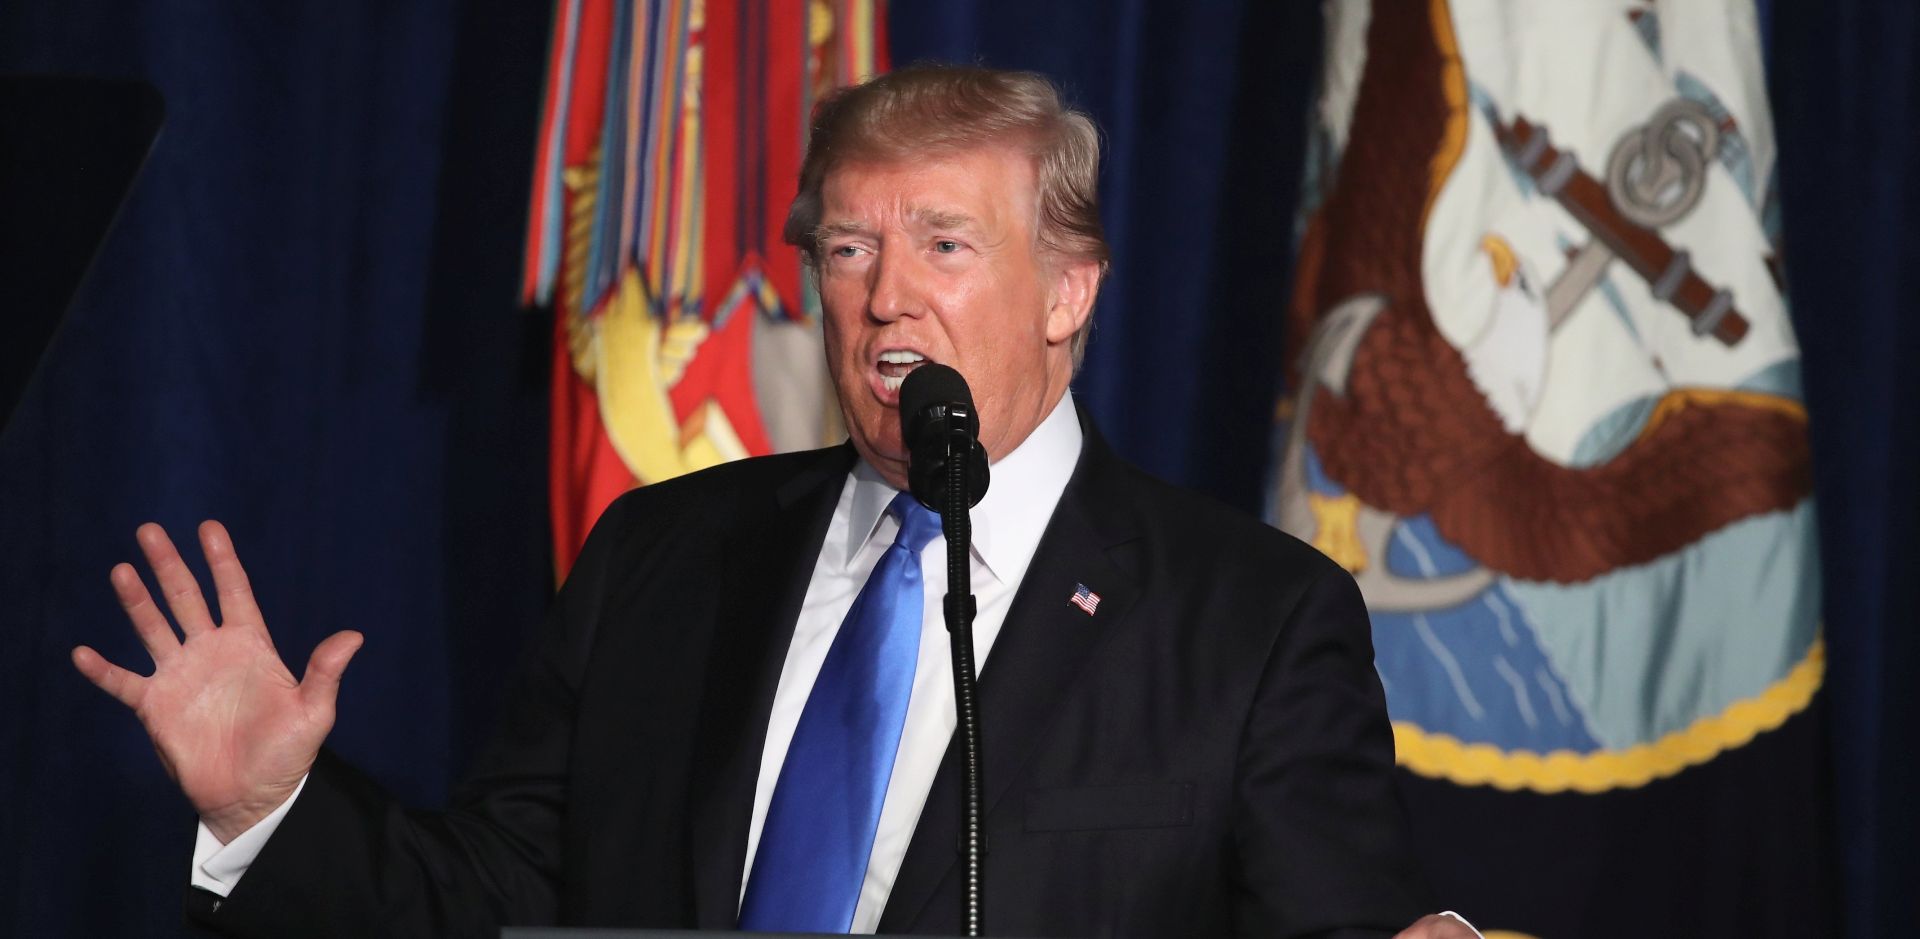 epa06155620 US President Donald J. Trump delivers remarks on Americas military involvement in Afghanistan at the Fort Myer military base in Arlington, Virginia, USA, 21 August 2017. Trump was expected to announce a modest increase in troop levels in Afghanistan, the result of a growing concern by the Pentagon over setbacks on the battlefield for the Afghan military against Taliban and al-Qaeda forces.  EPA/MARK WILSON / POOL